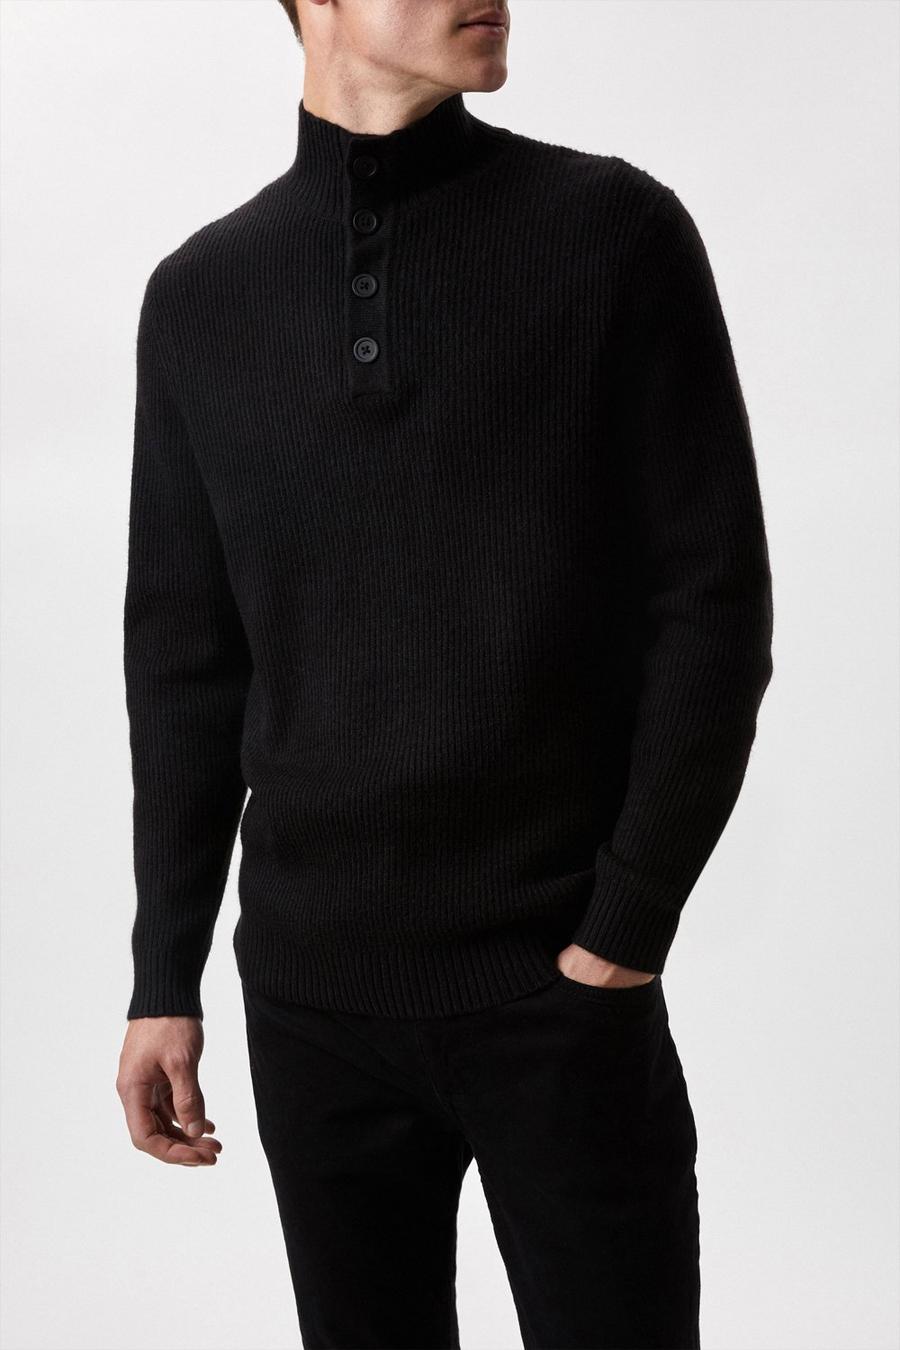 Super Soft Black Button Up Knitted Funnel